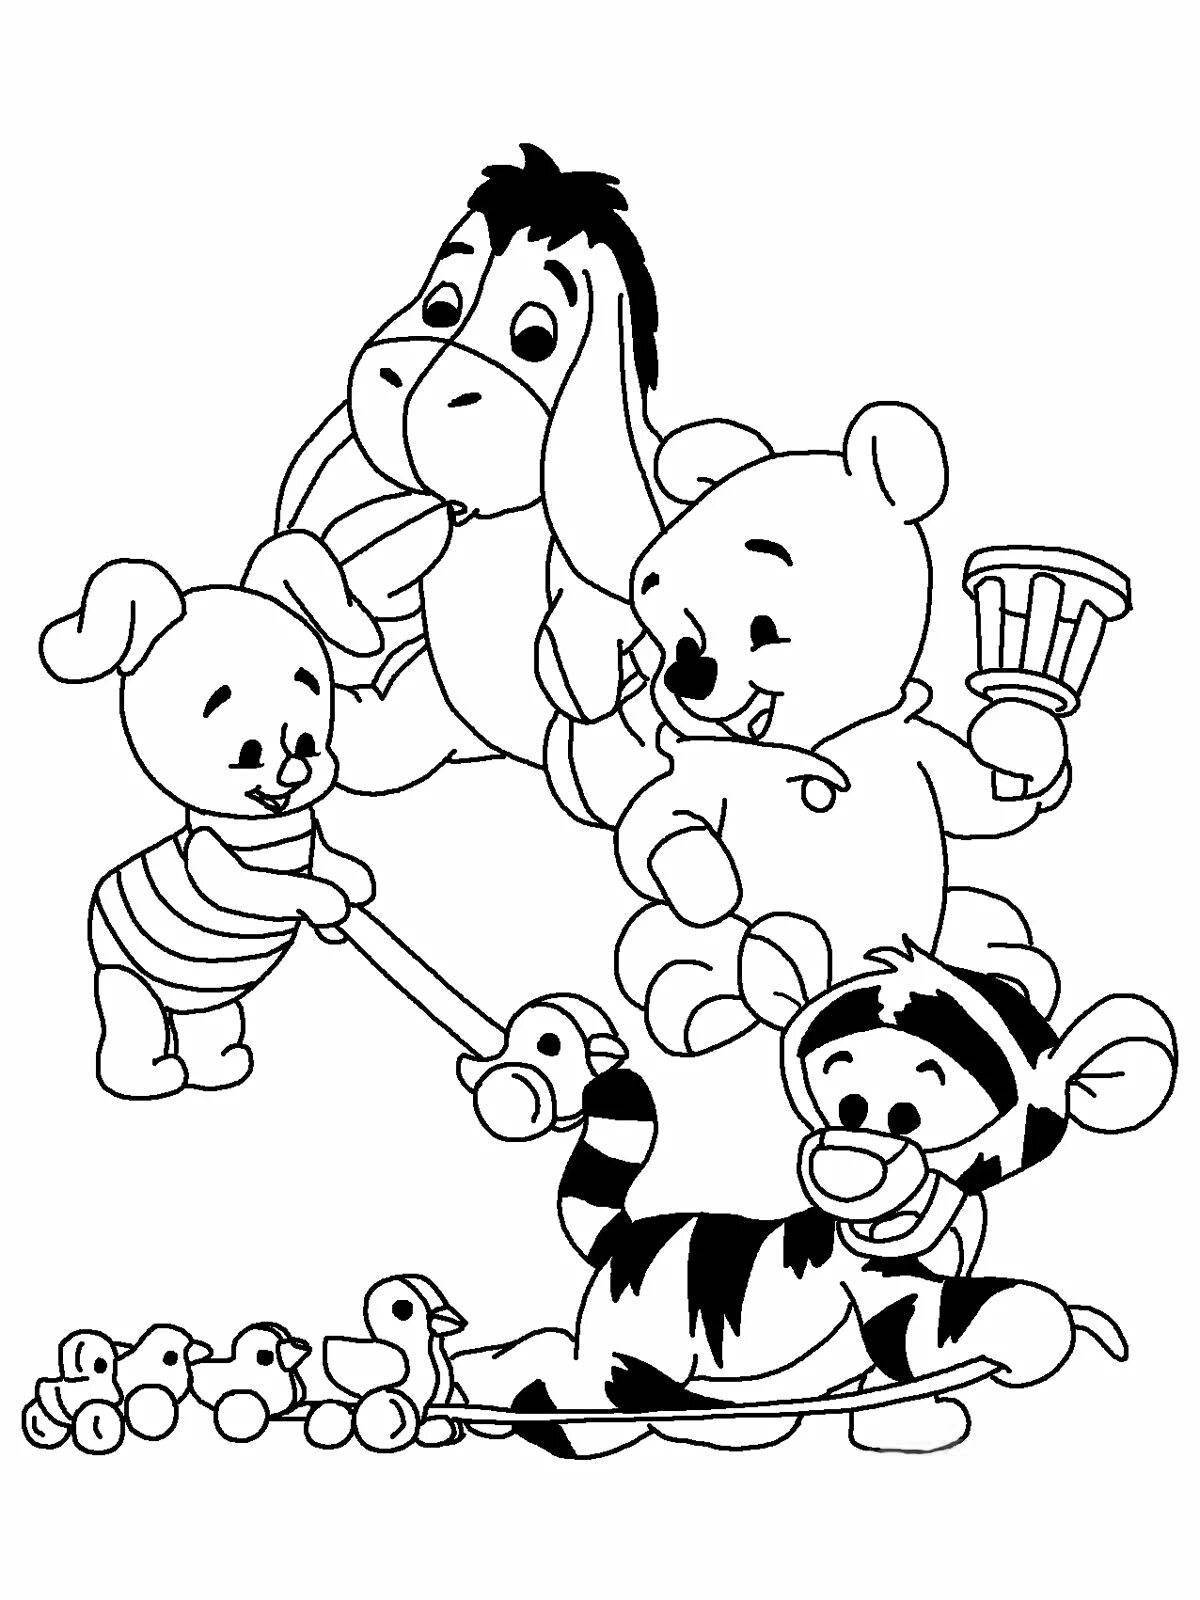 Bright winnie the pooh coloring book